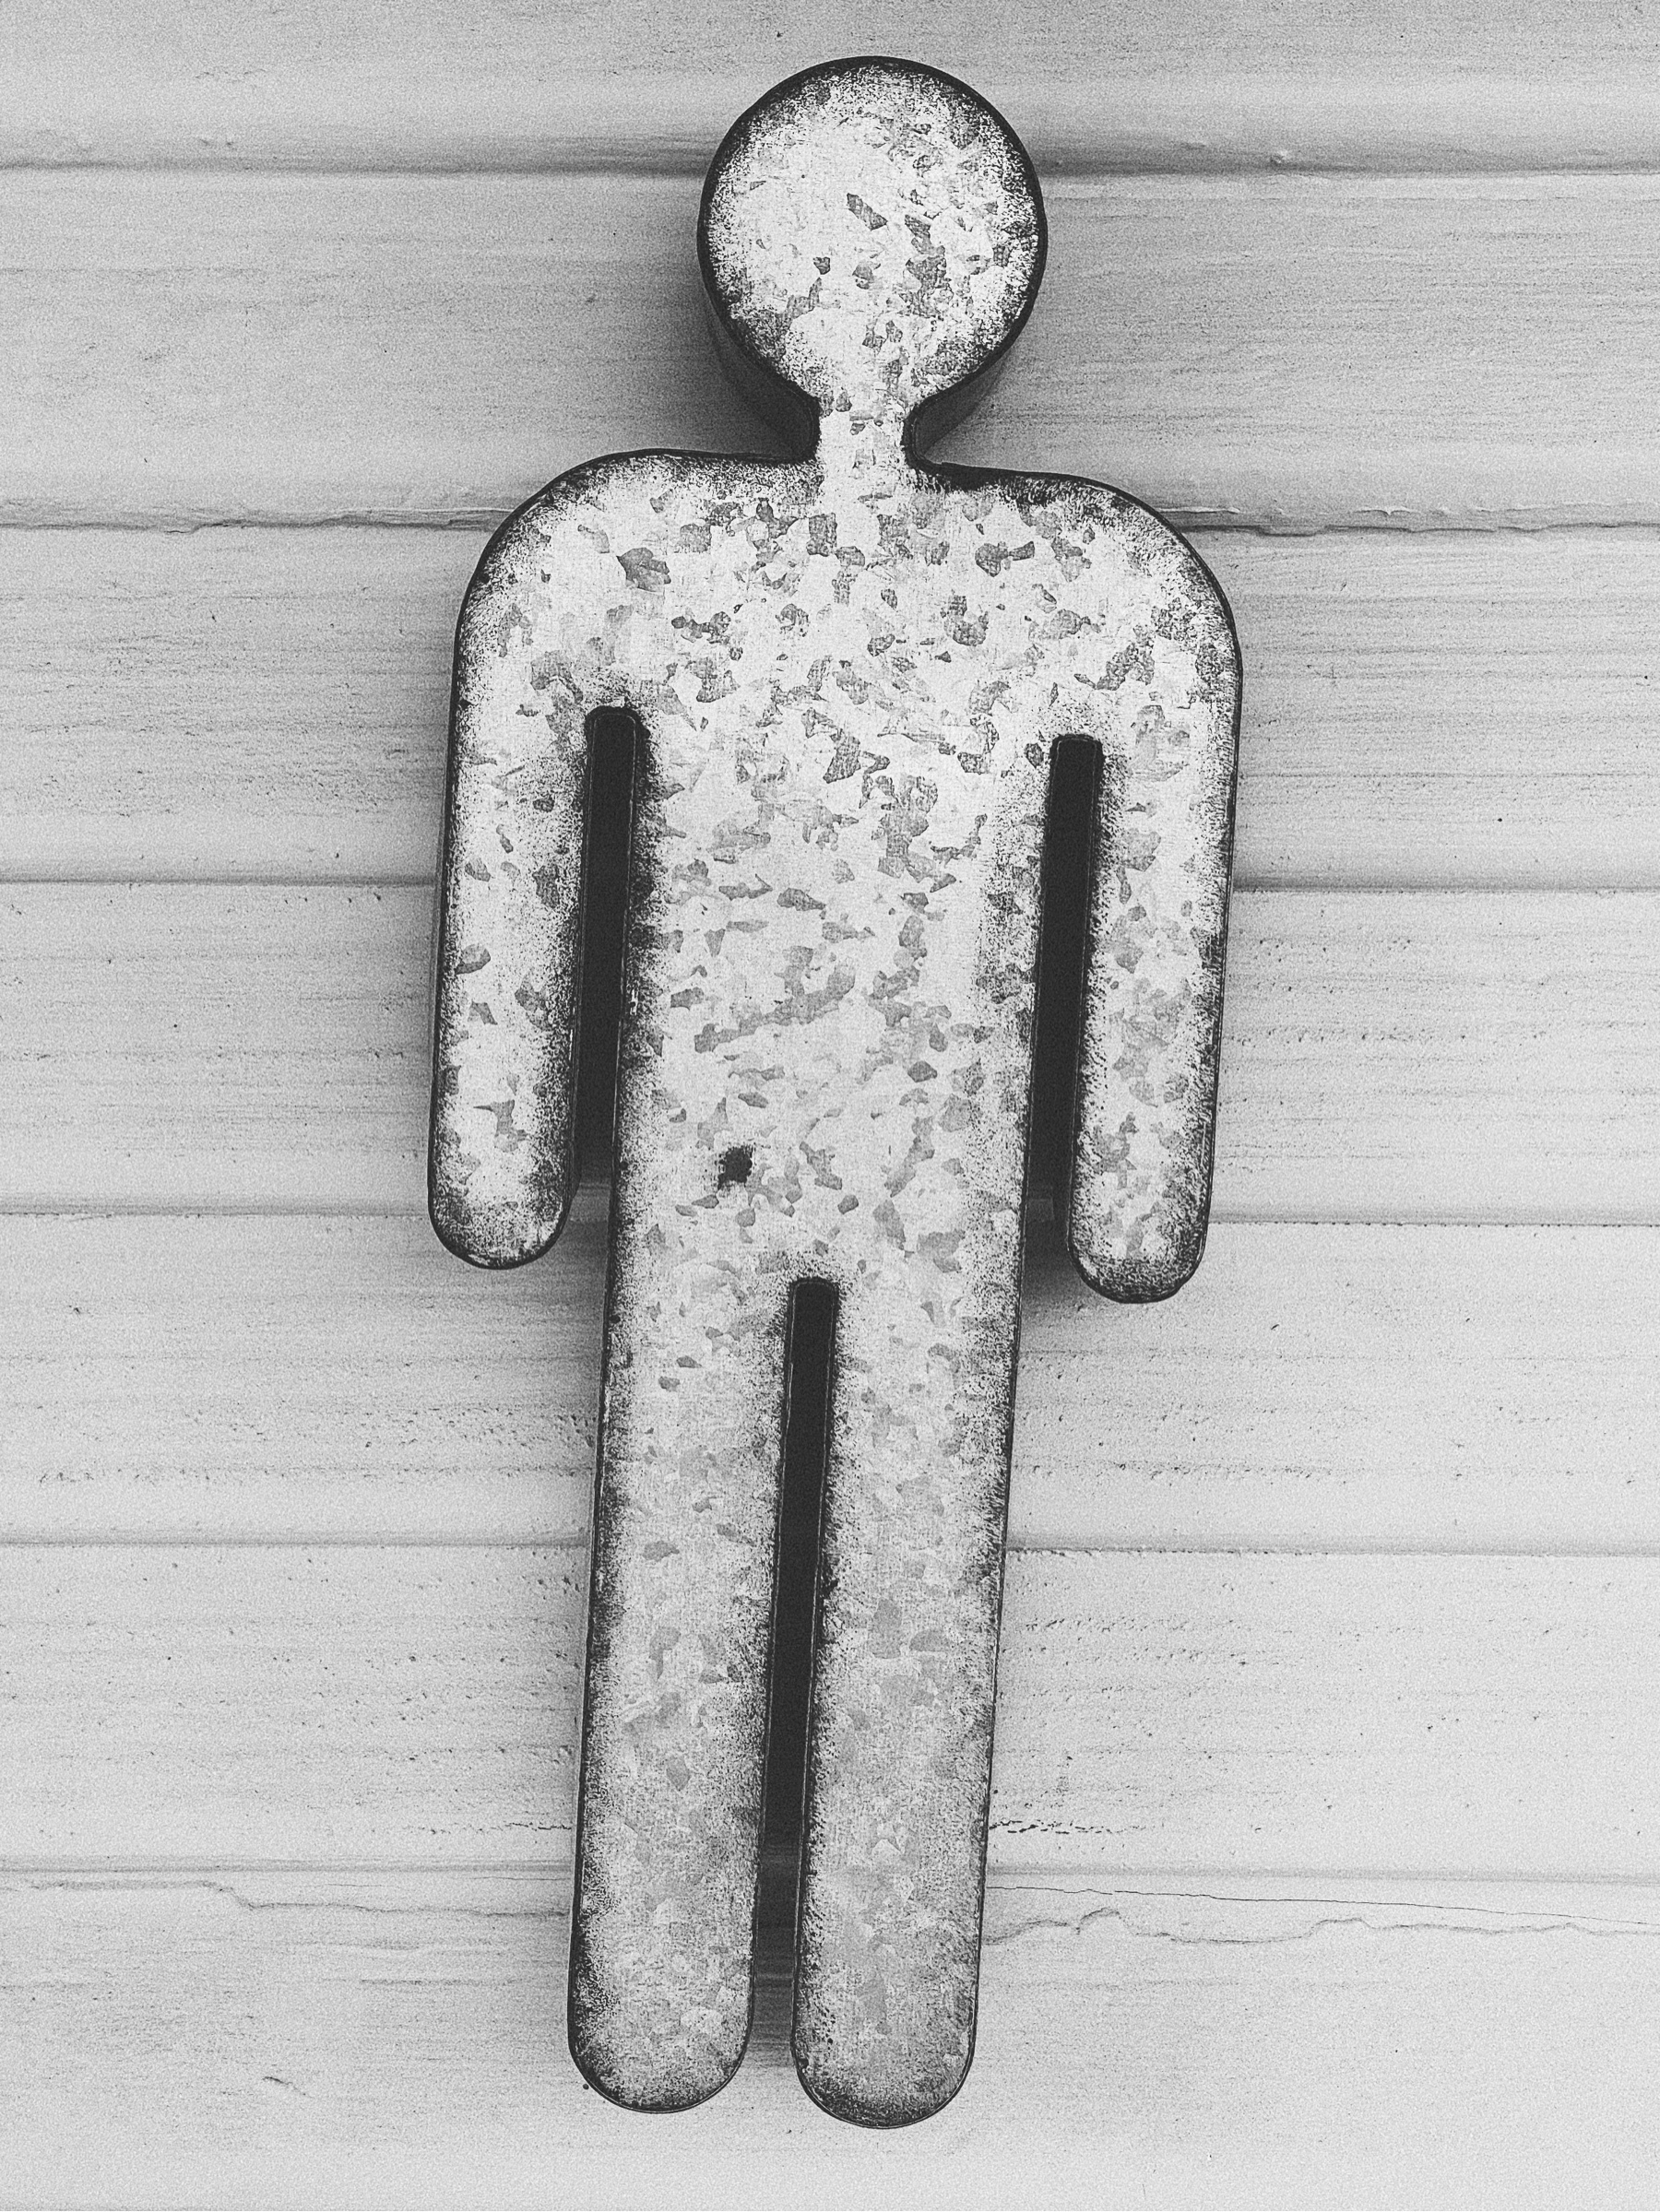 Shape of man made out of metal affixed to wood siding